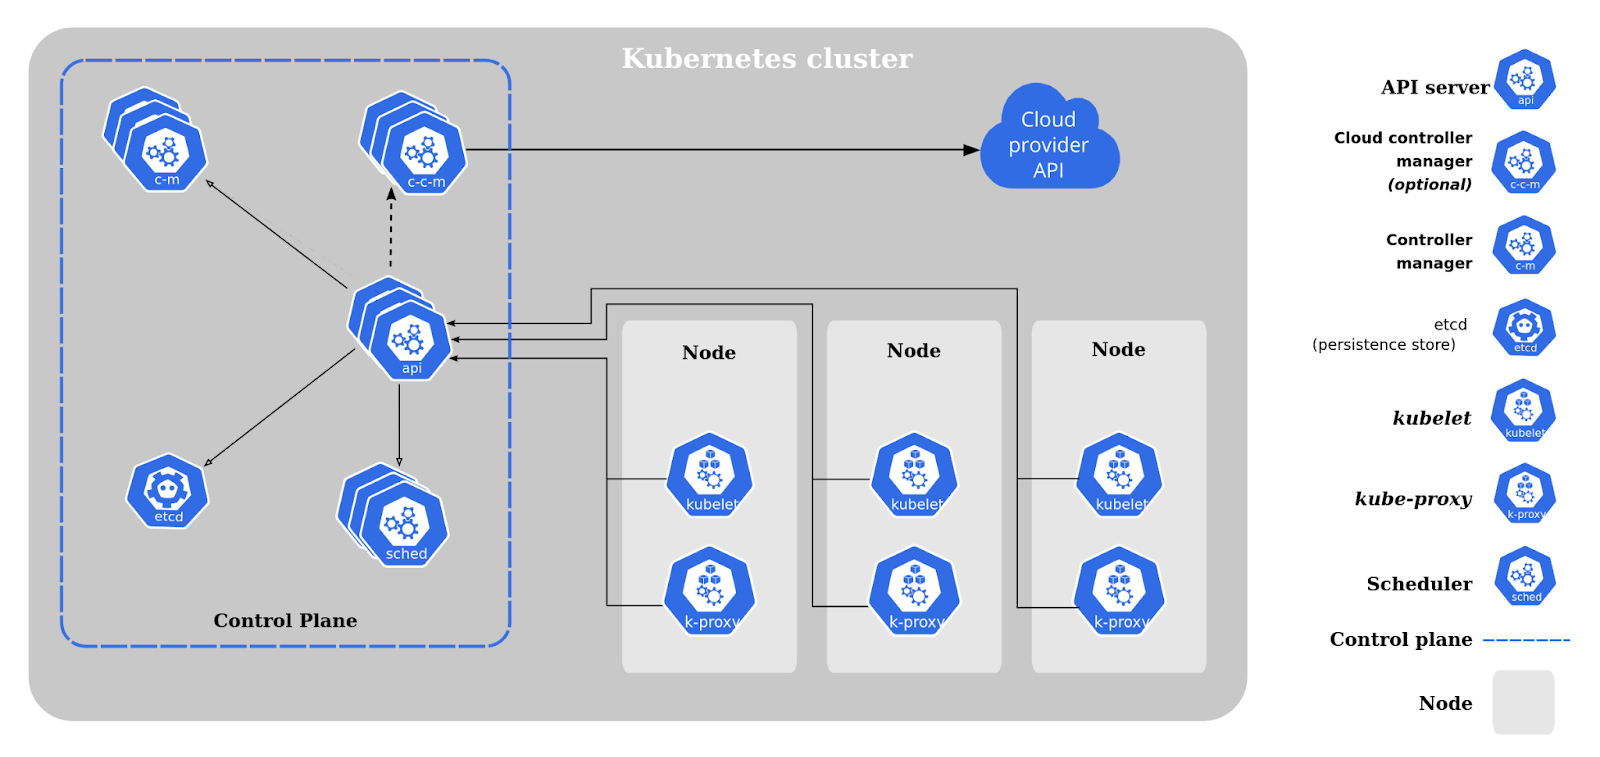 Architectural diagram showing the various components of Kubernetes